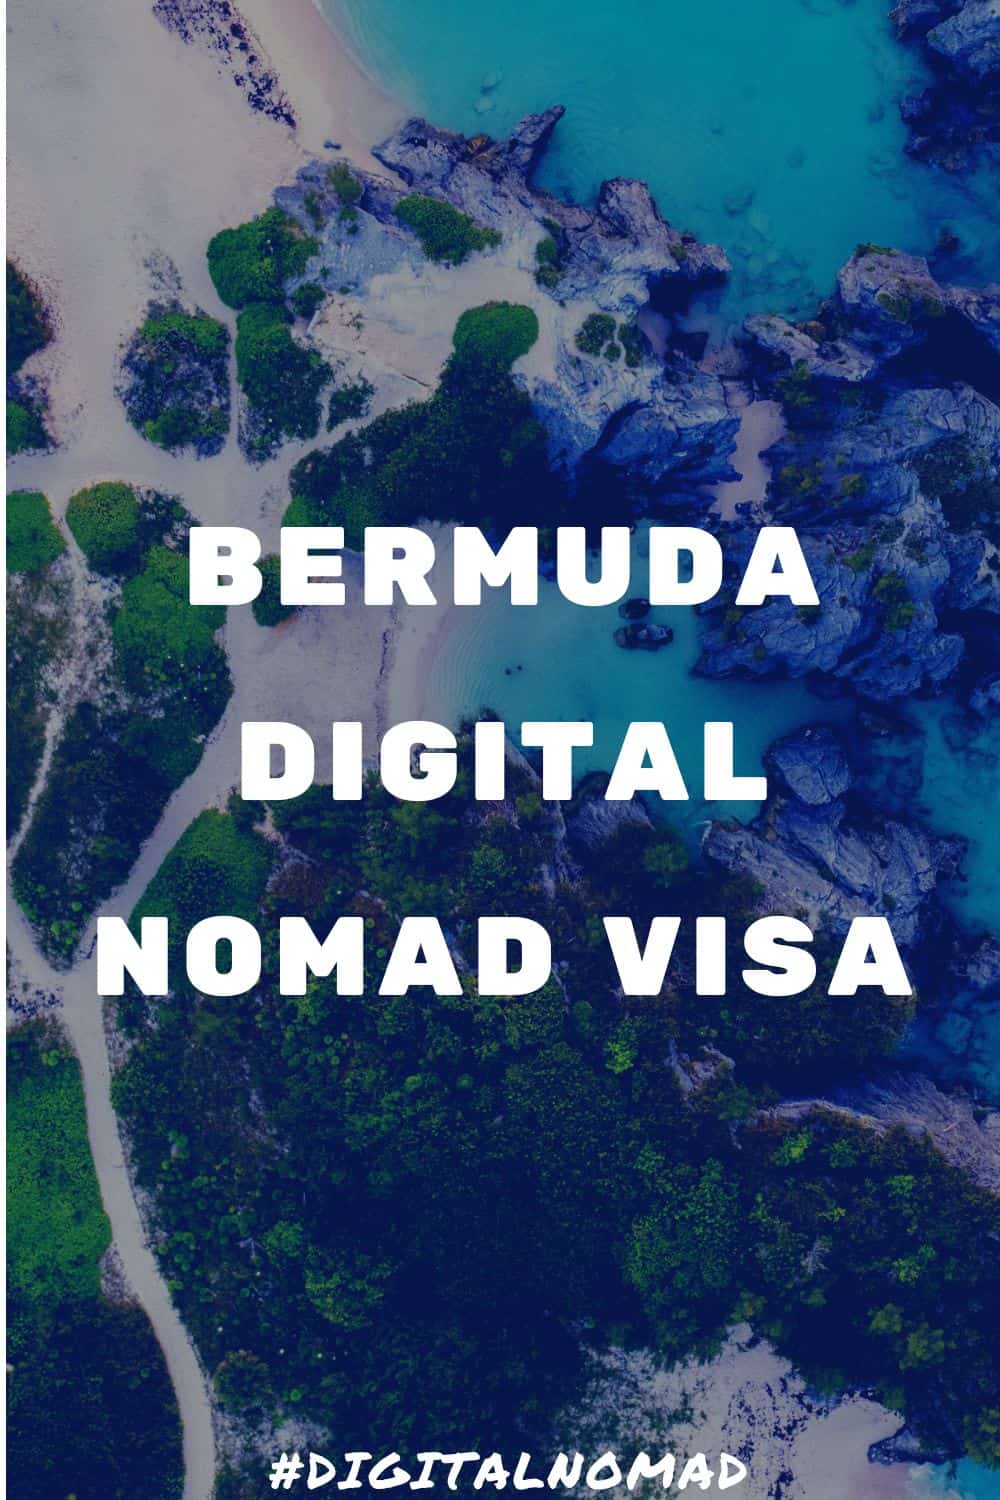 Bermuda Digital Nomad Visa – All You Need to Know